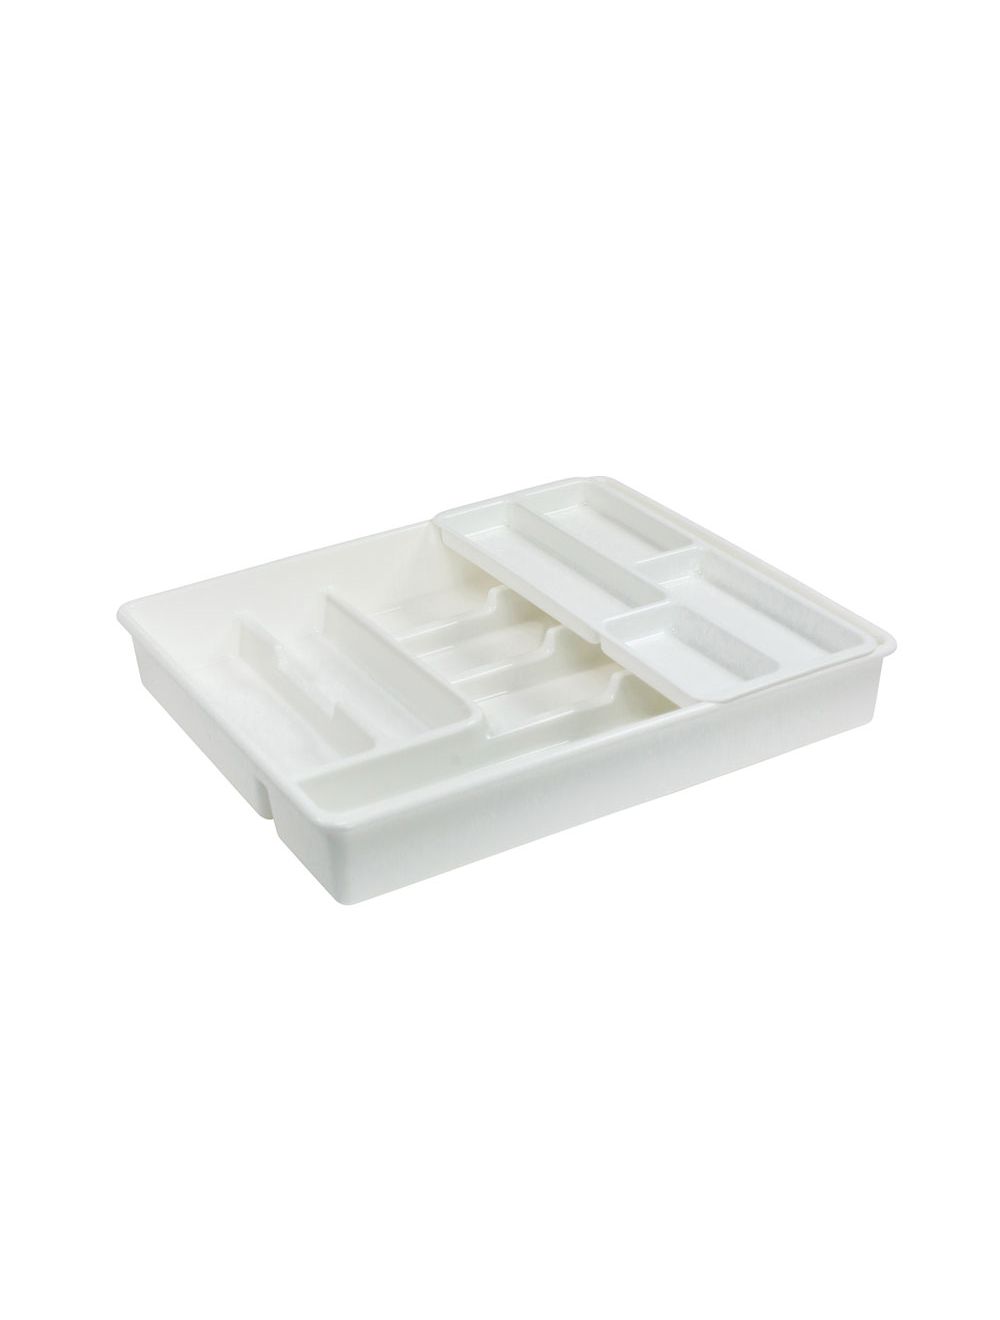 Cutlery Tray With Insert 10 Shelves - Assorted